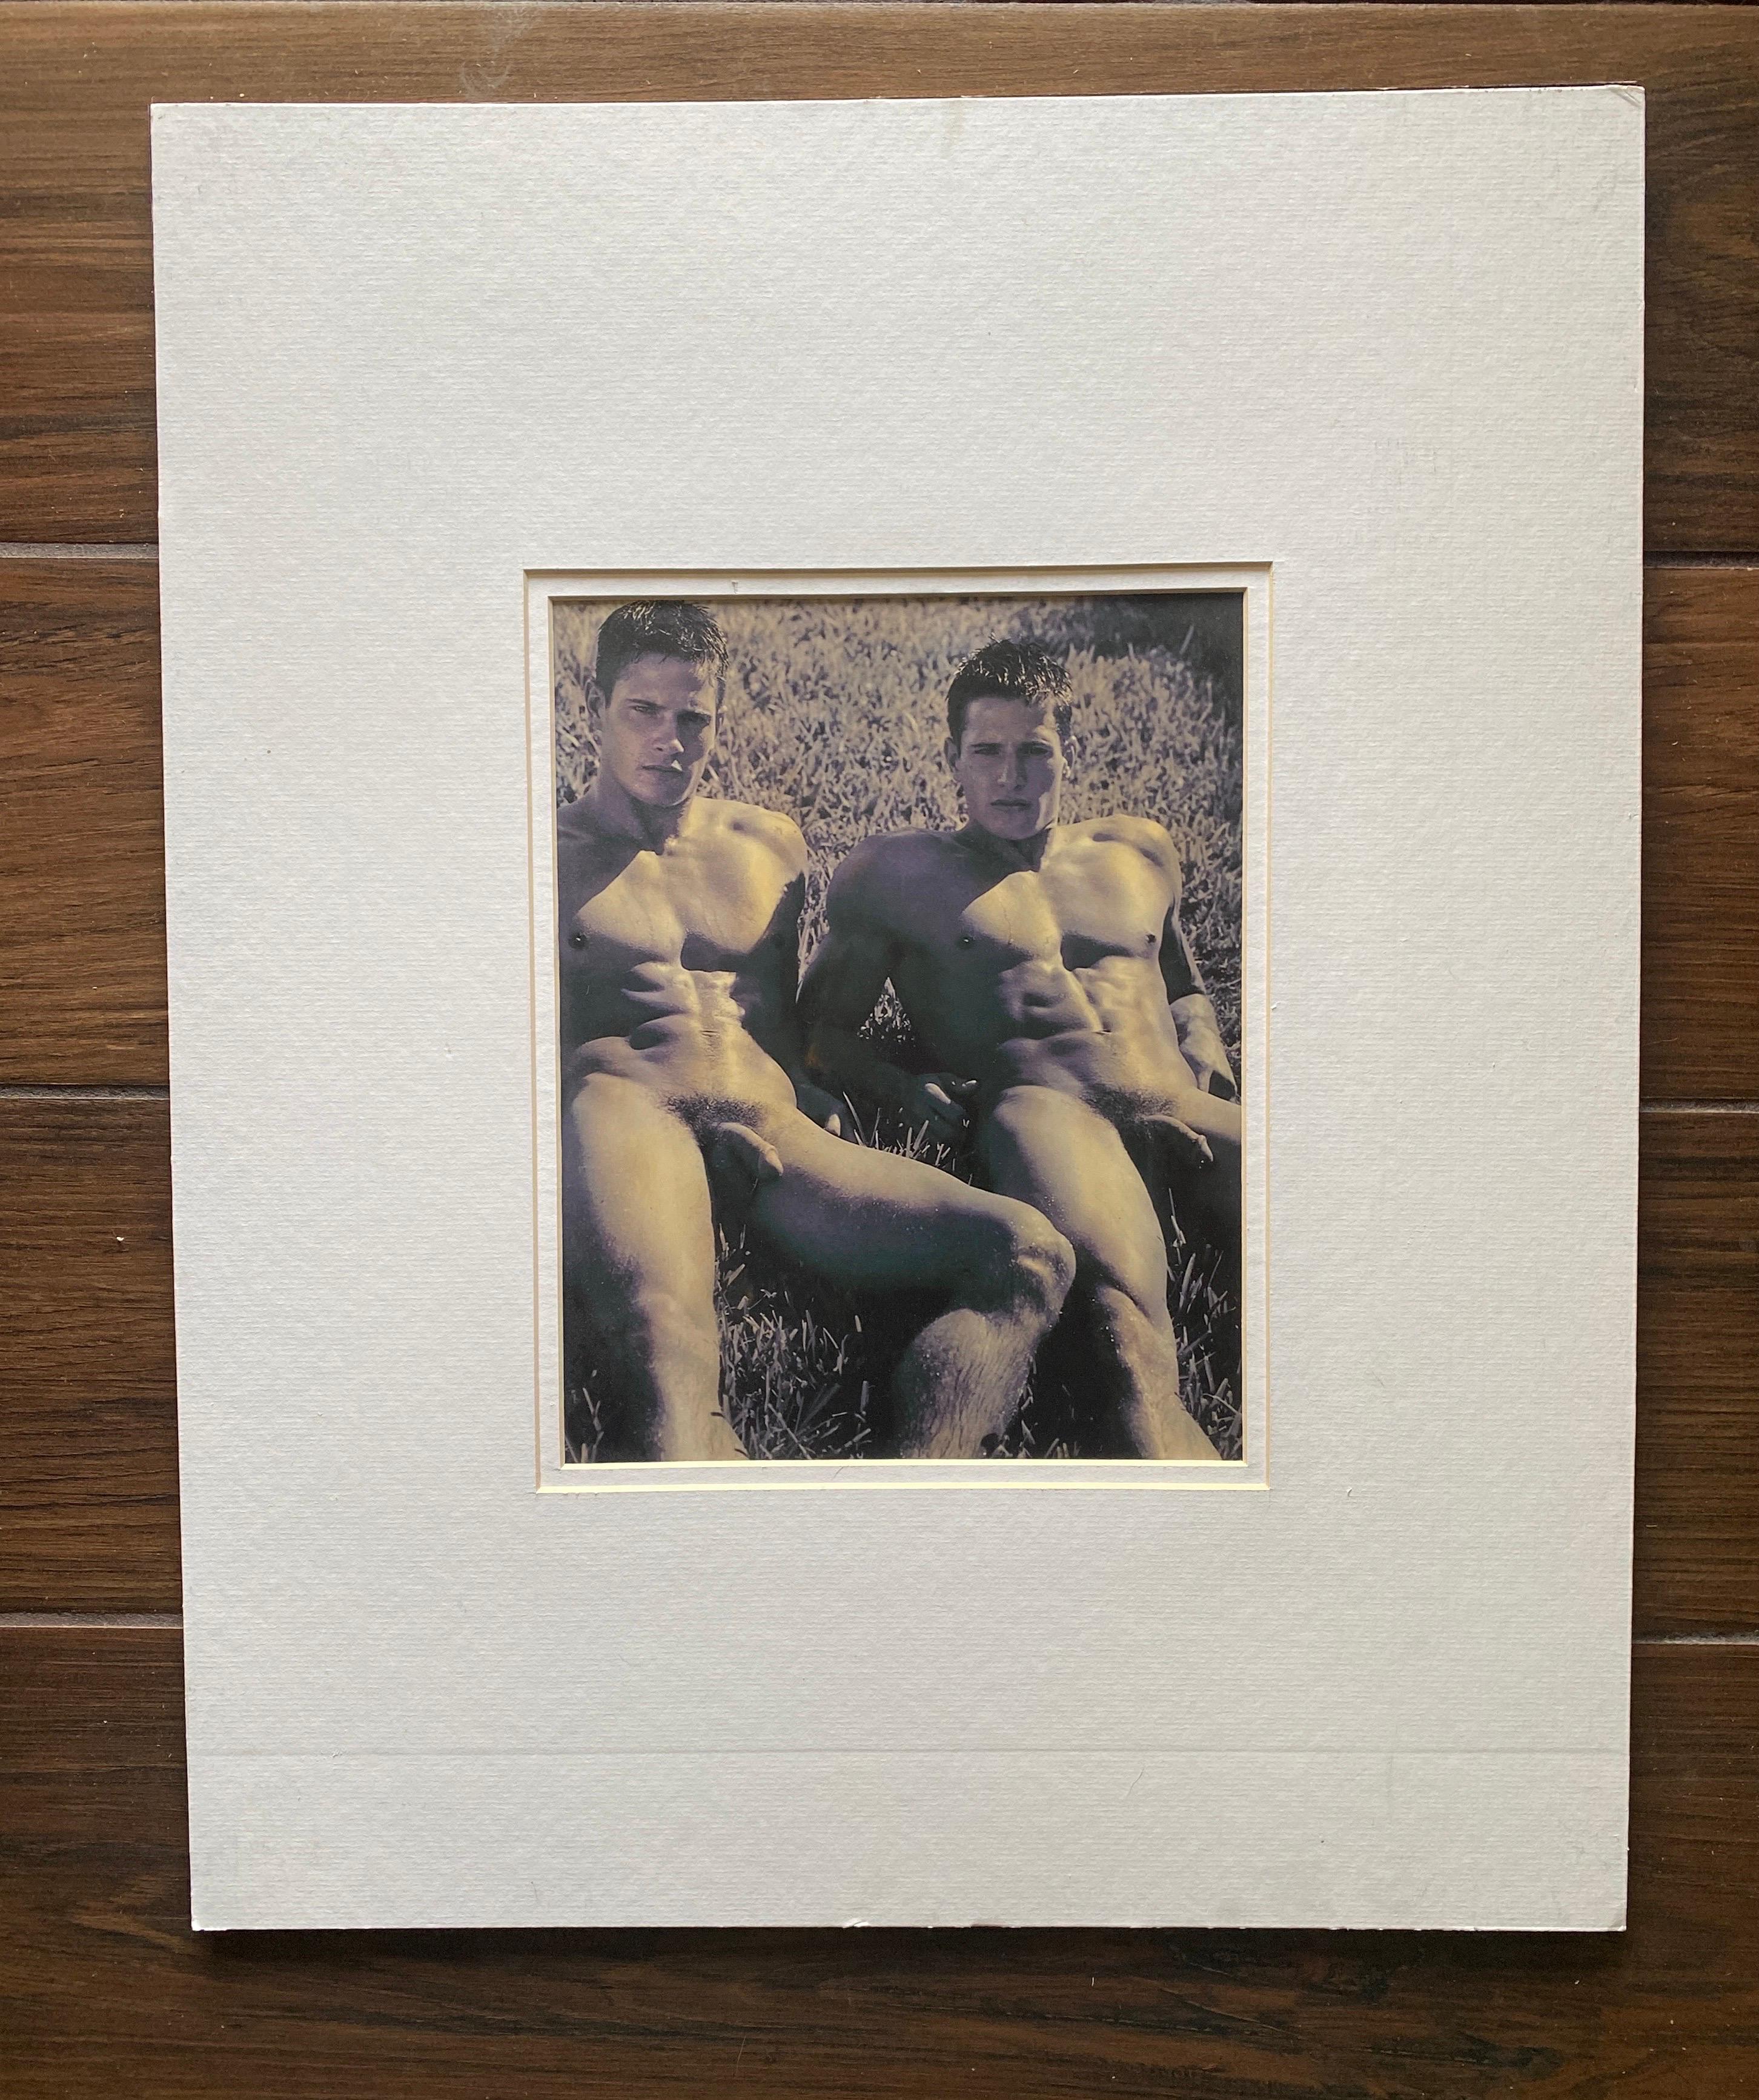 We are selling 4 images of the Carlson Twins, Lane and Kyle. What we know: the series of nudes was shot by Bruce Weber in 2000. They are titled “Kyle and Lane Carlson, 2000, Bruce Weber”. All 4 images appear to be hand toned (not computer